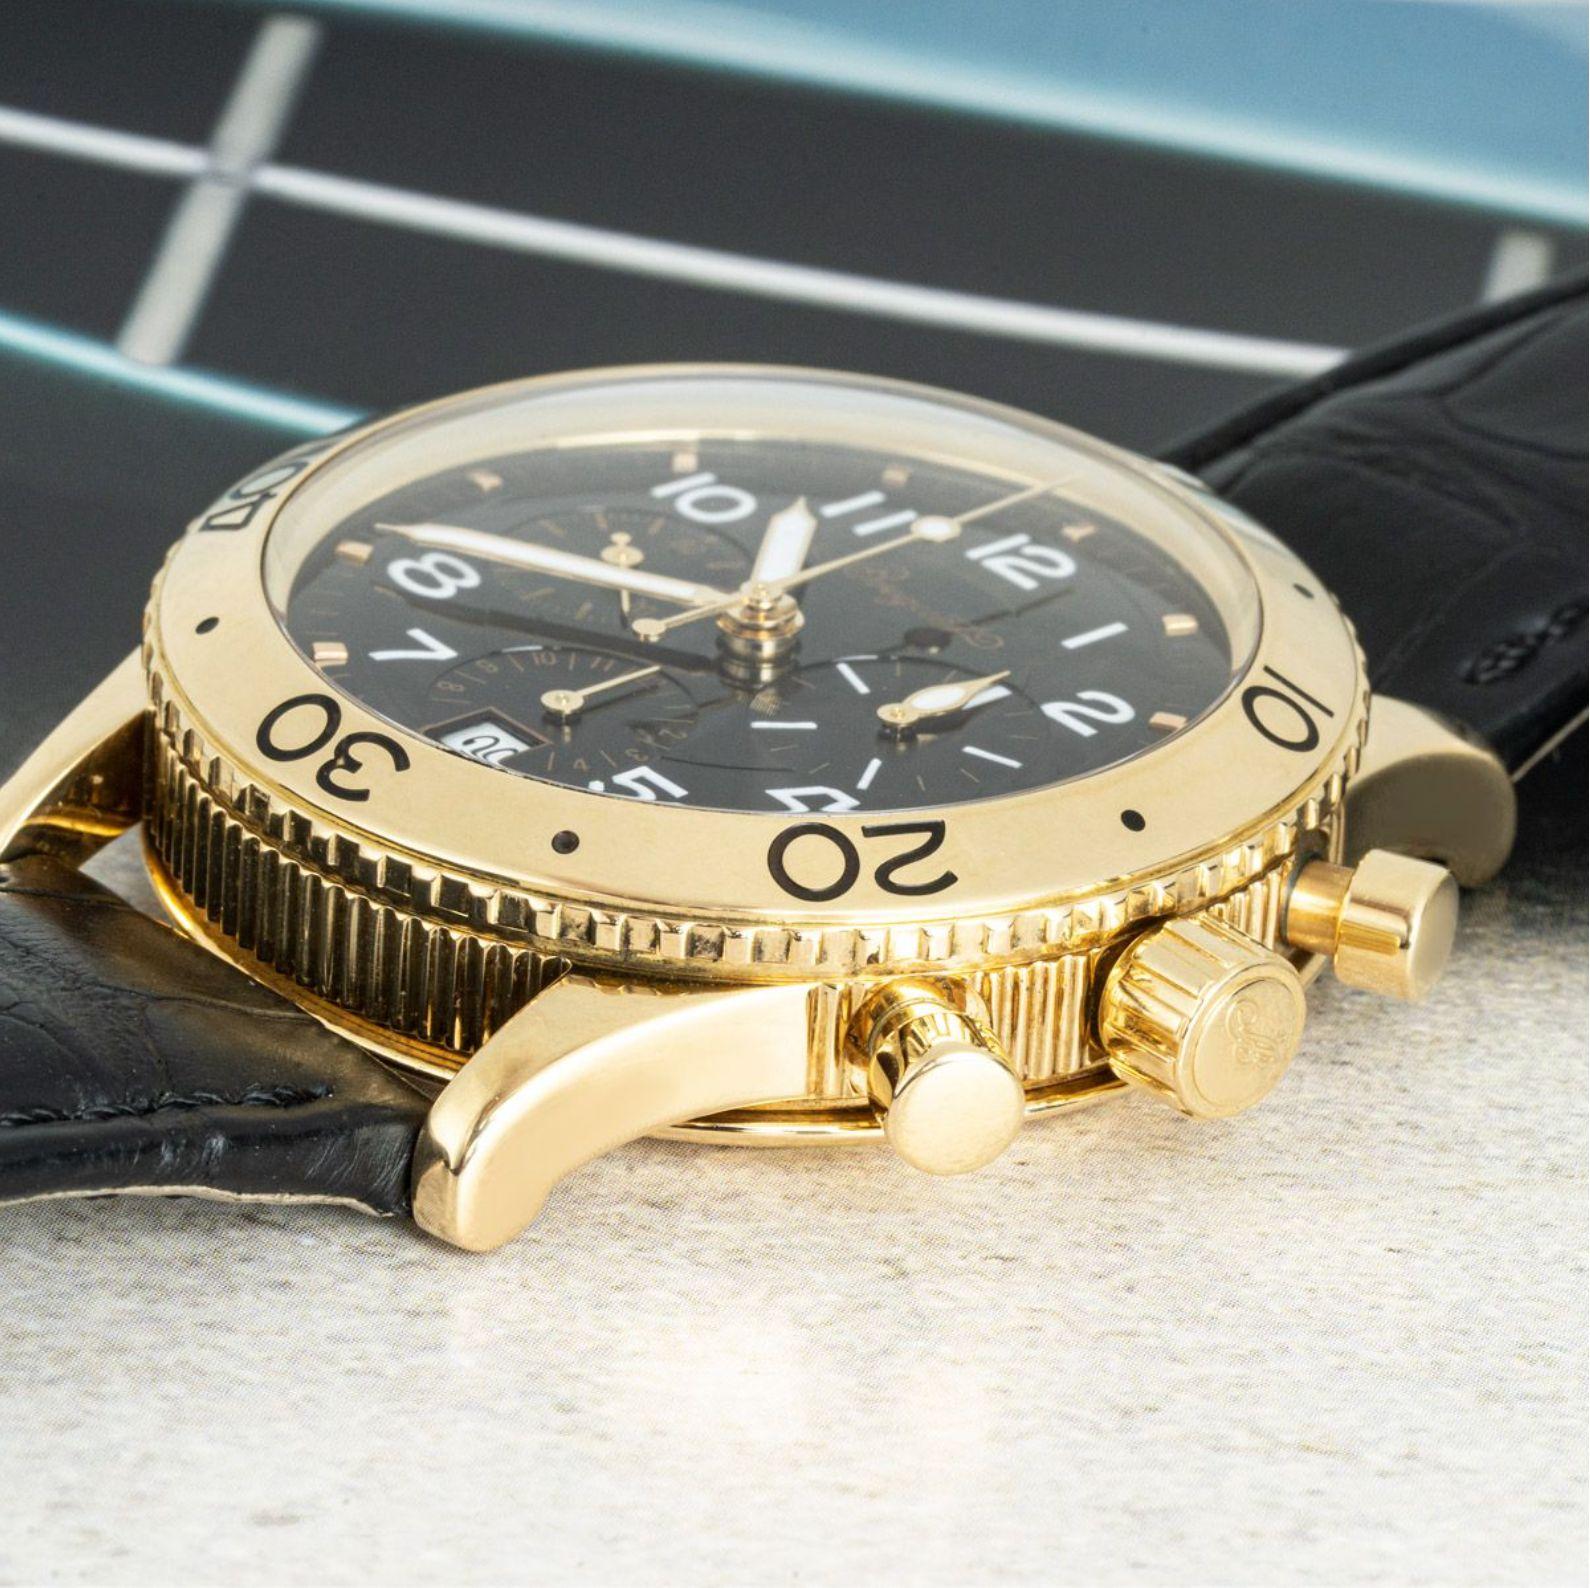 A yellow gold Type XX Transatlantique wristwatch by Breguet. Featuring a black dial with arabic numbers, a date aperture, 3 chronograph counters and a yellow gold bi-directional rotating bezel. Fitted with a sapphire glass, a self-winding automatic